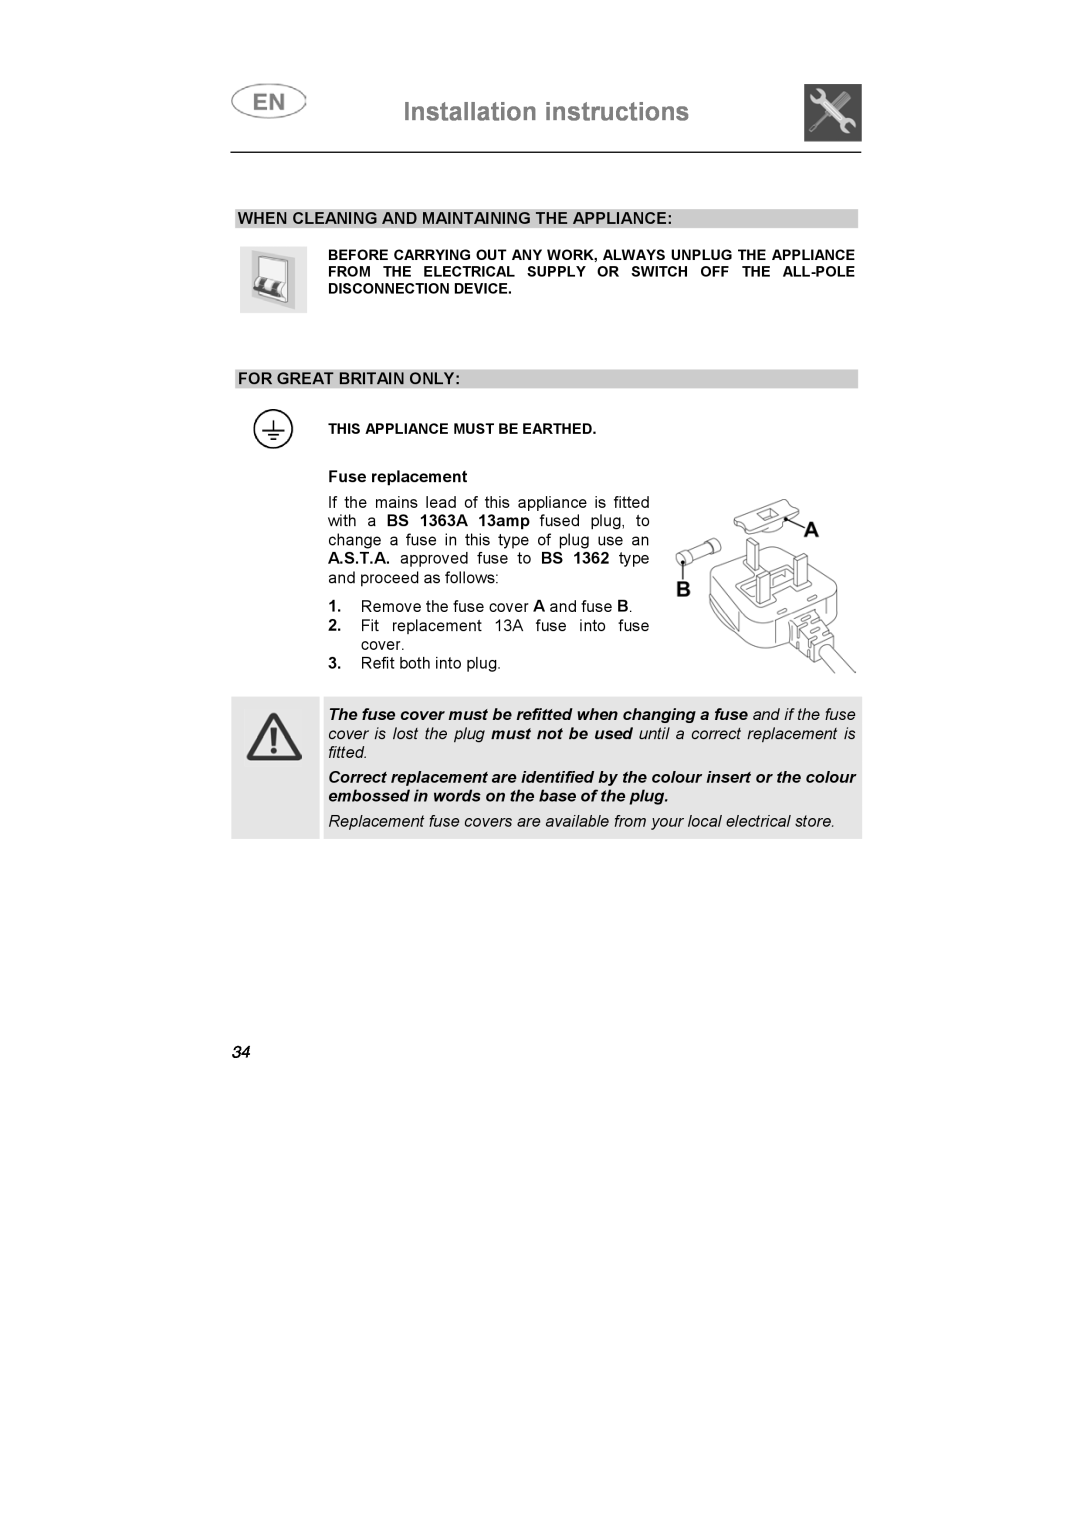 Smeg STX1-5, STX1-7 manual Installation instructions, When Cleaning And Maintaining The Appliance, For Great Britain Only 